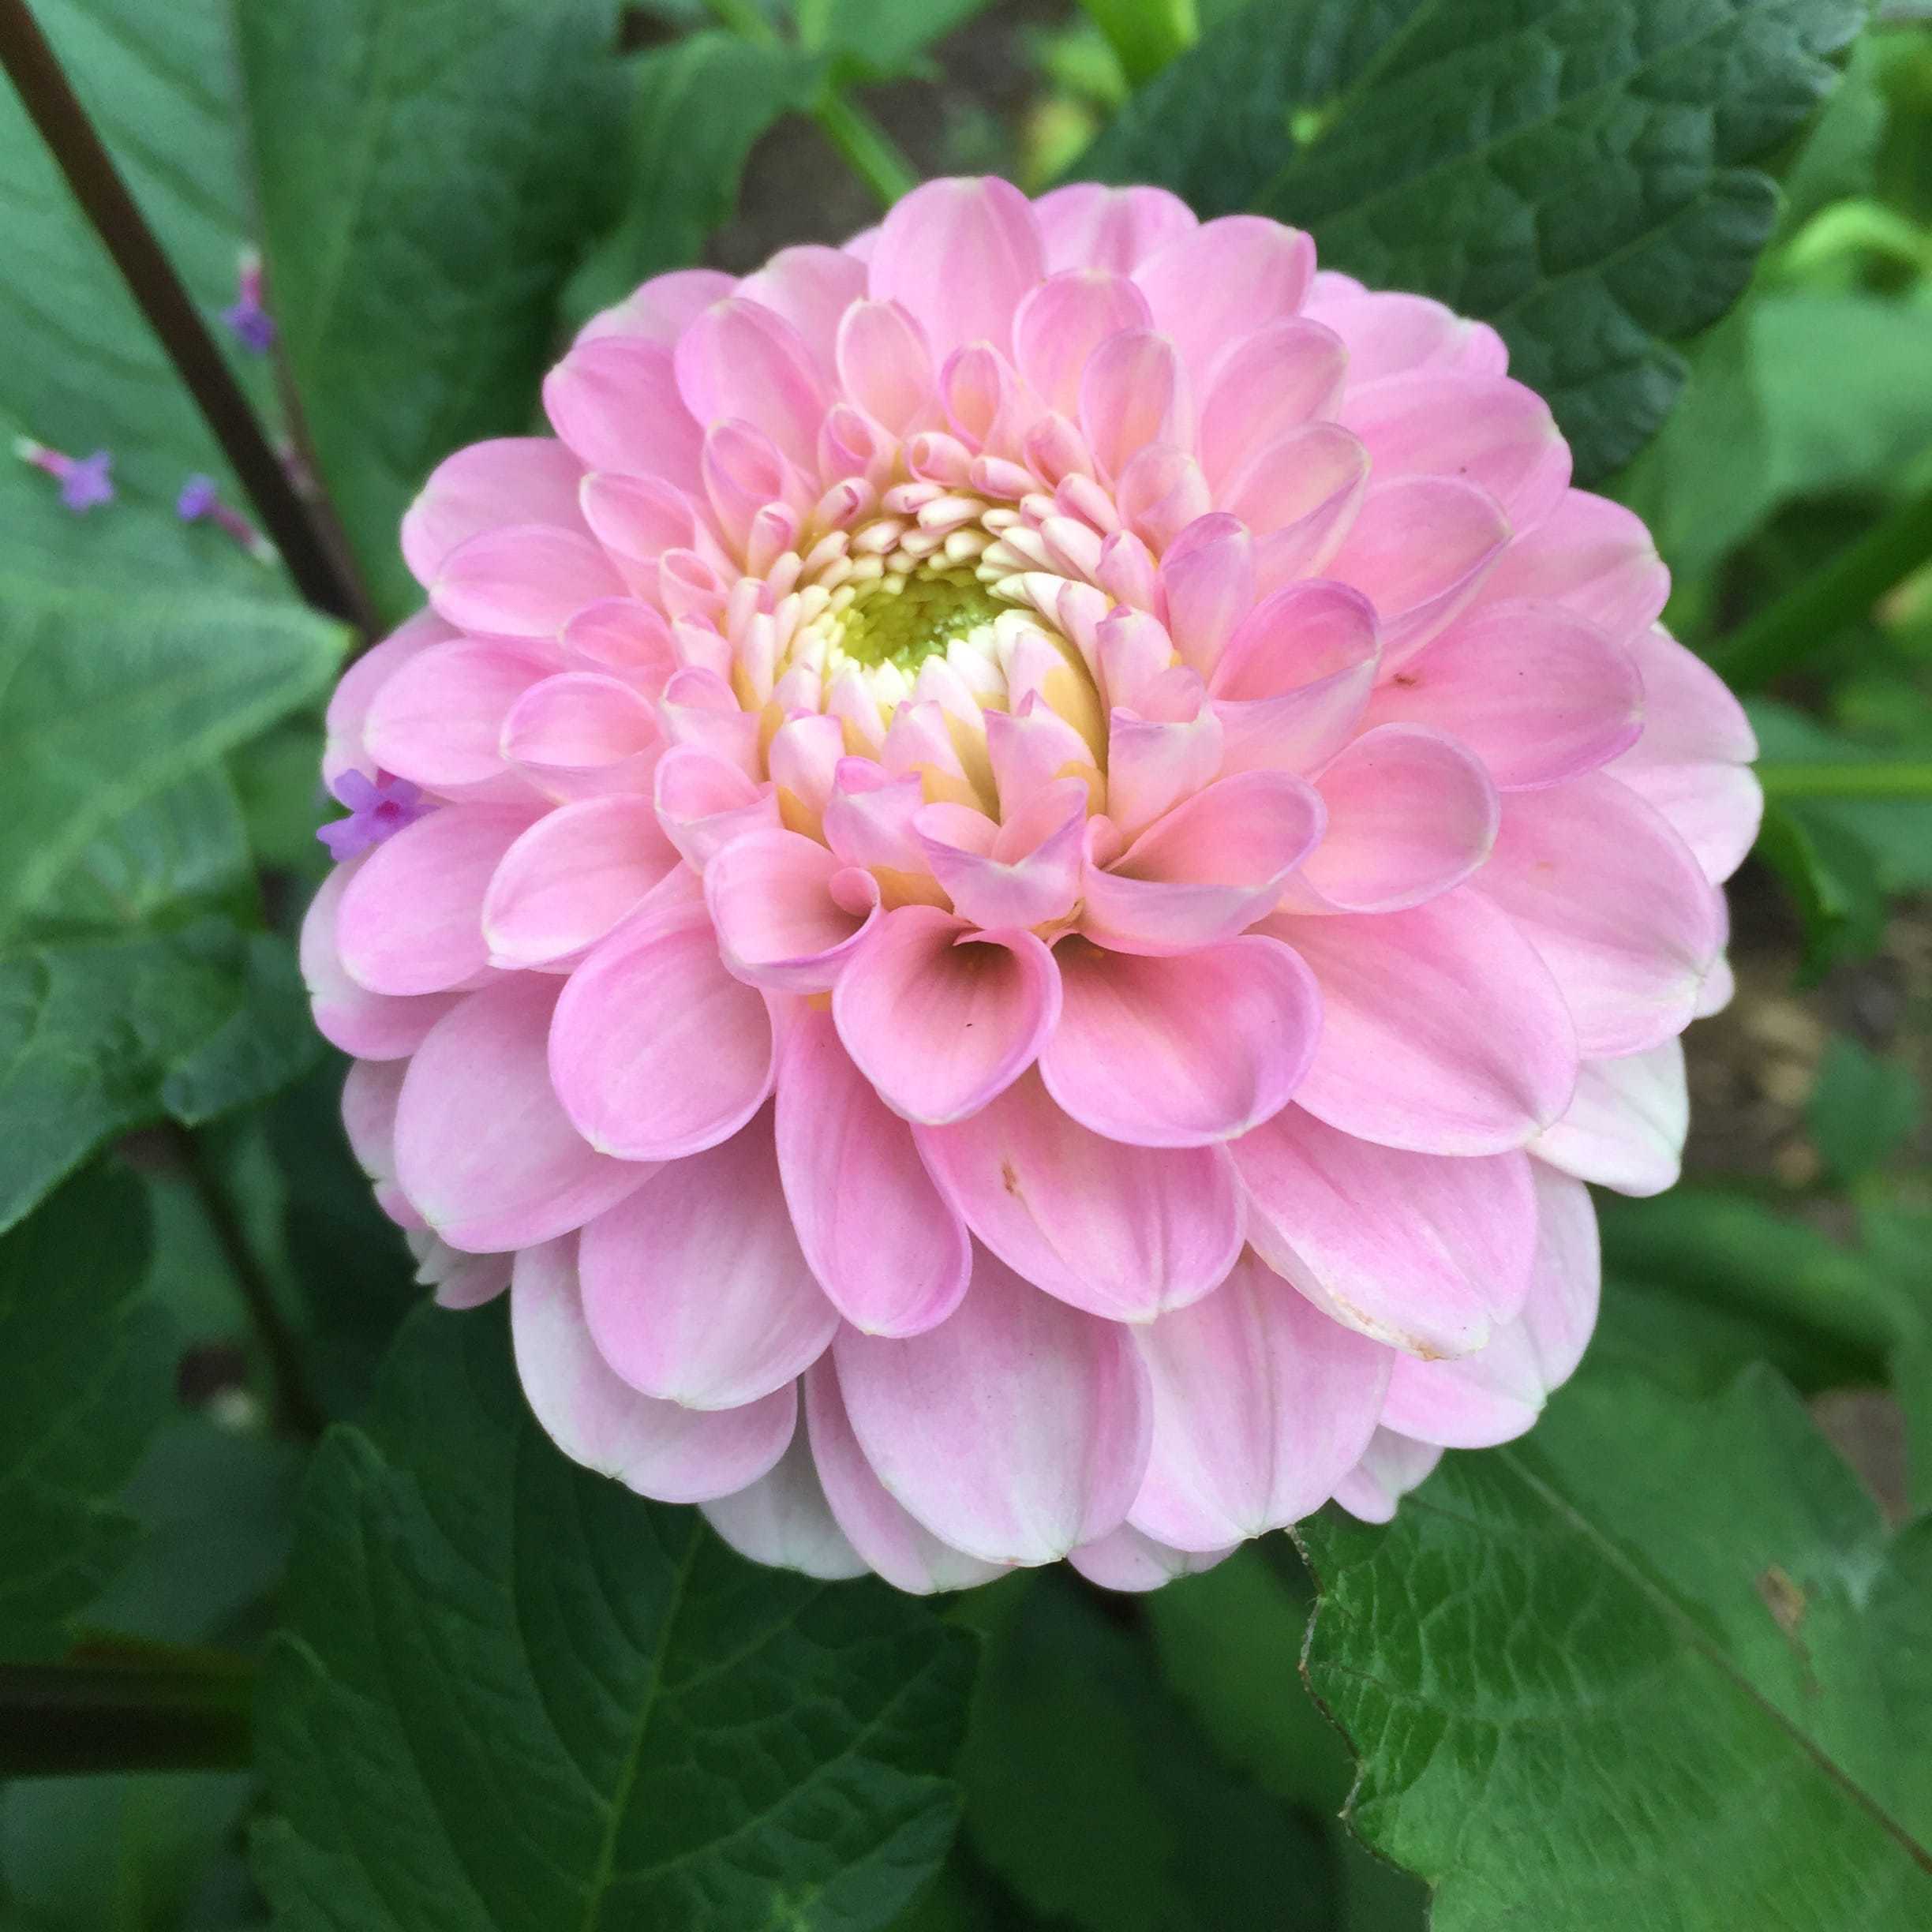 'Wizard of Oz' is a popular variety, producing perfect pink pompoms from mid-August to late fall.